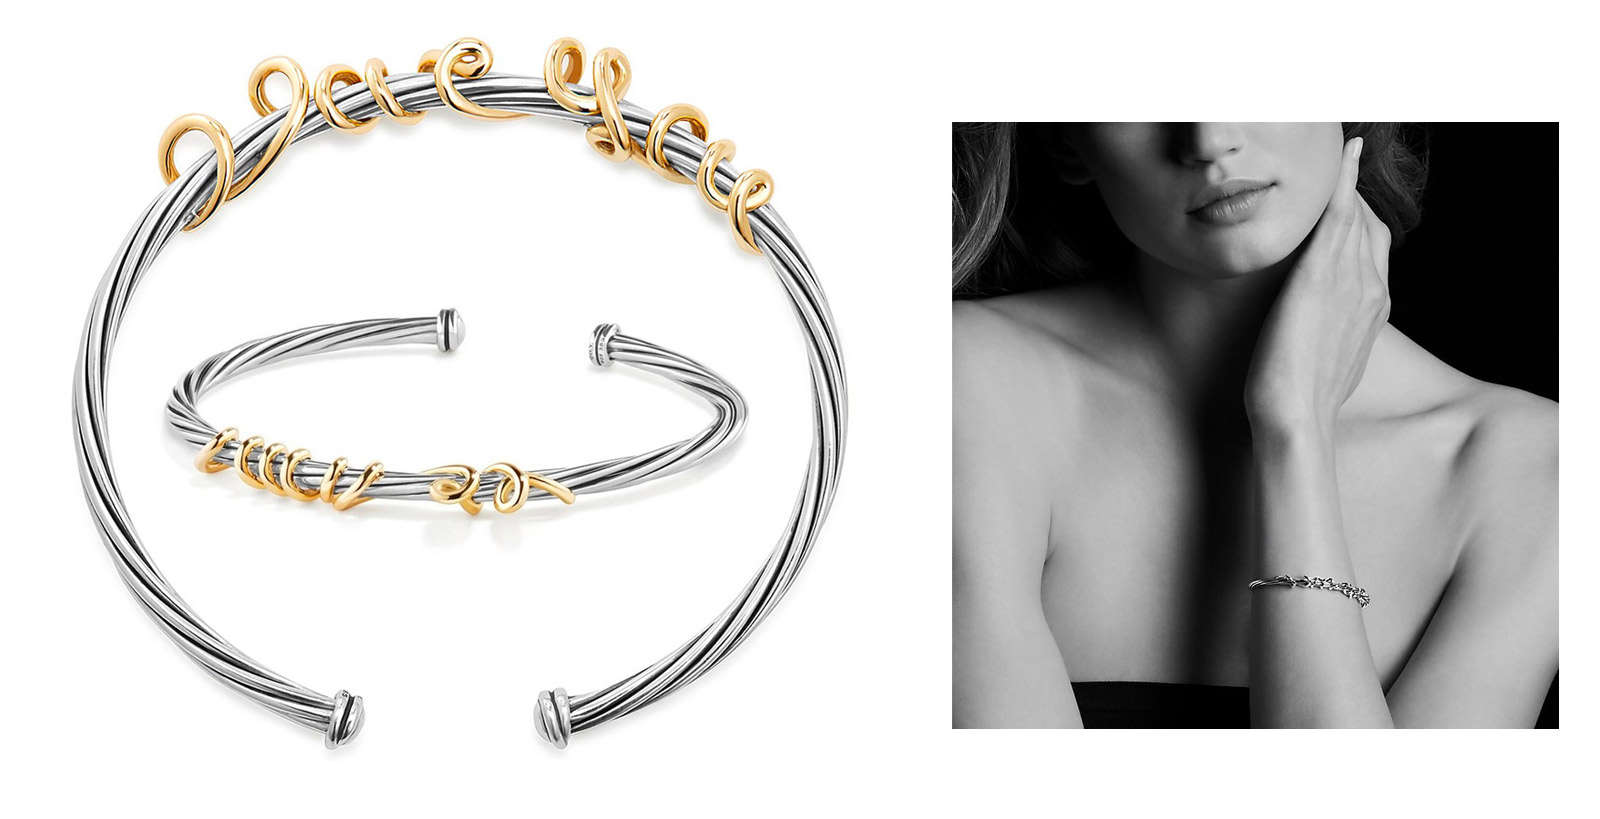 David Yurman 'Whispers' wrapped hidden message bracelet  in 18k gold and silver